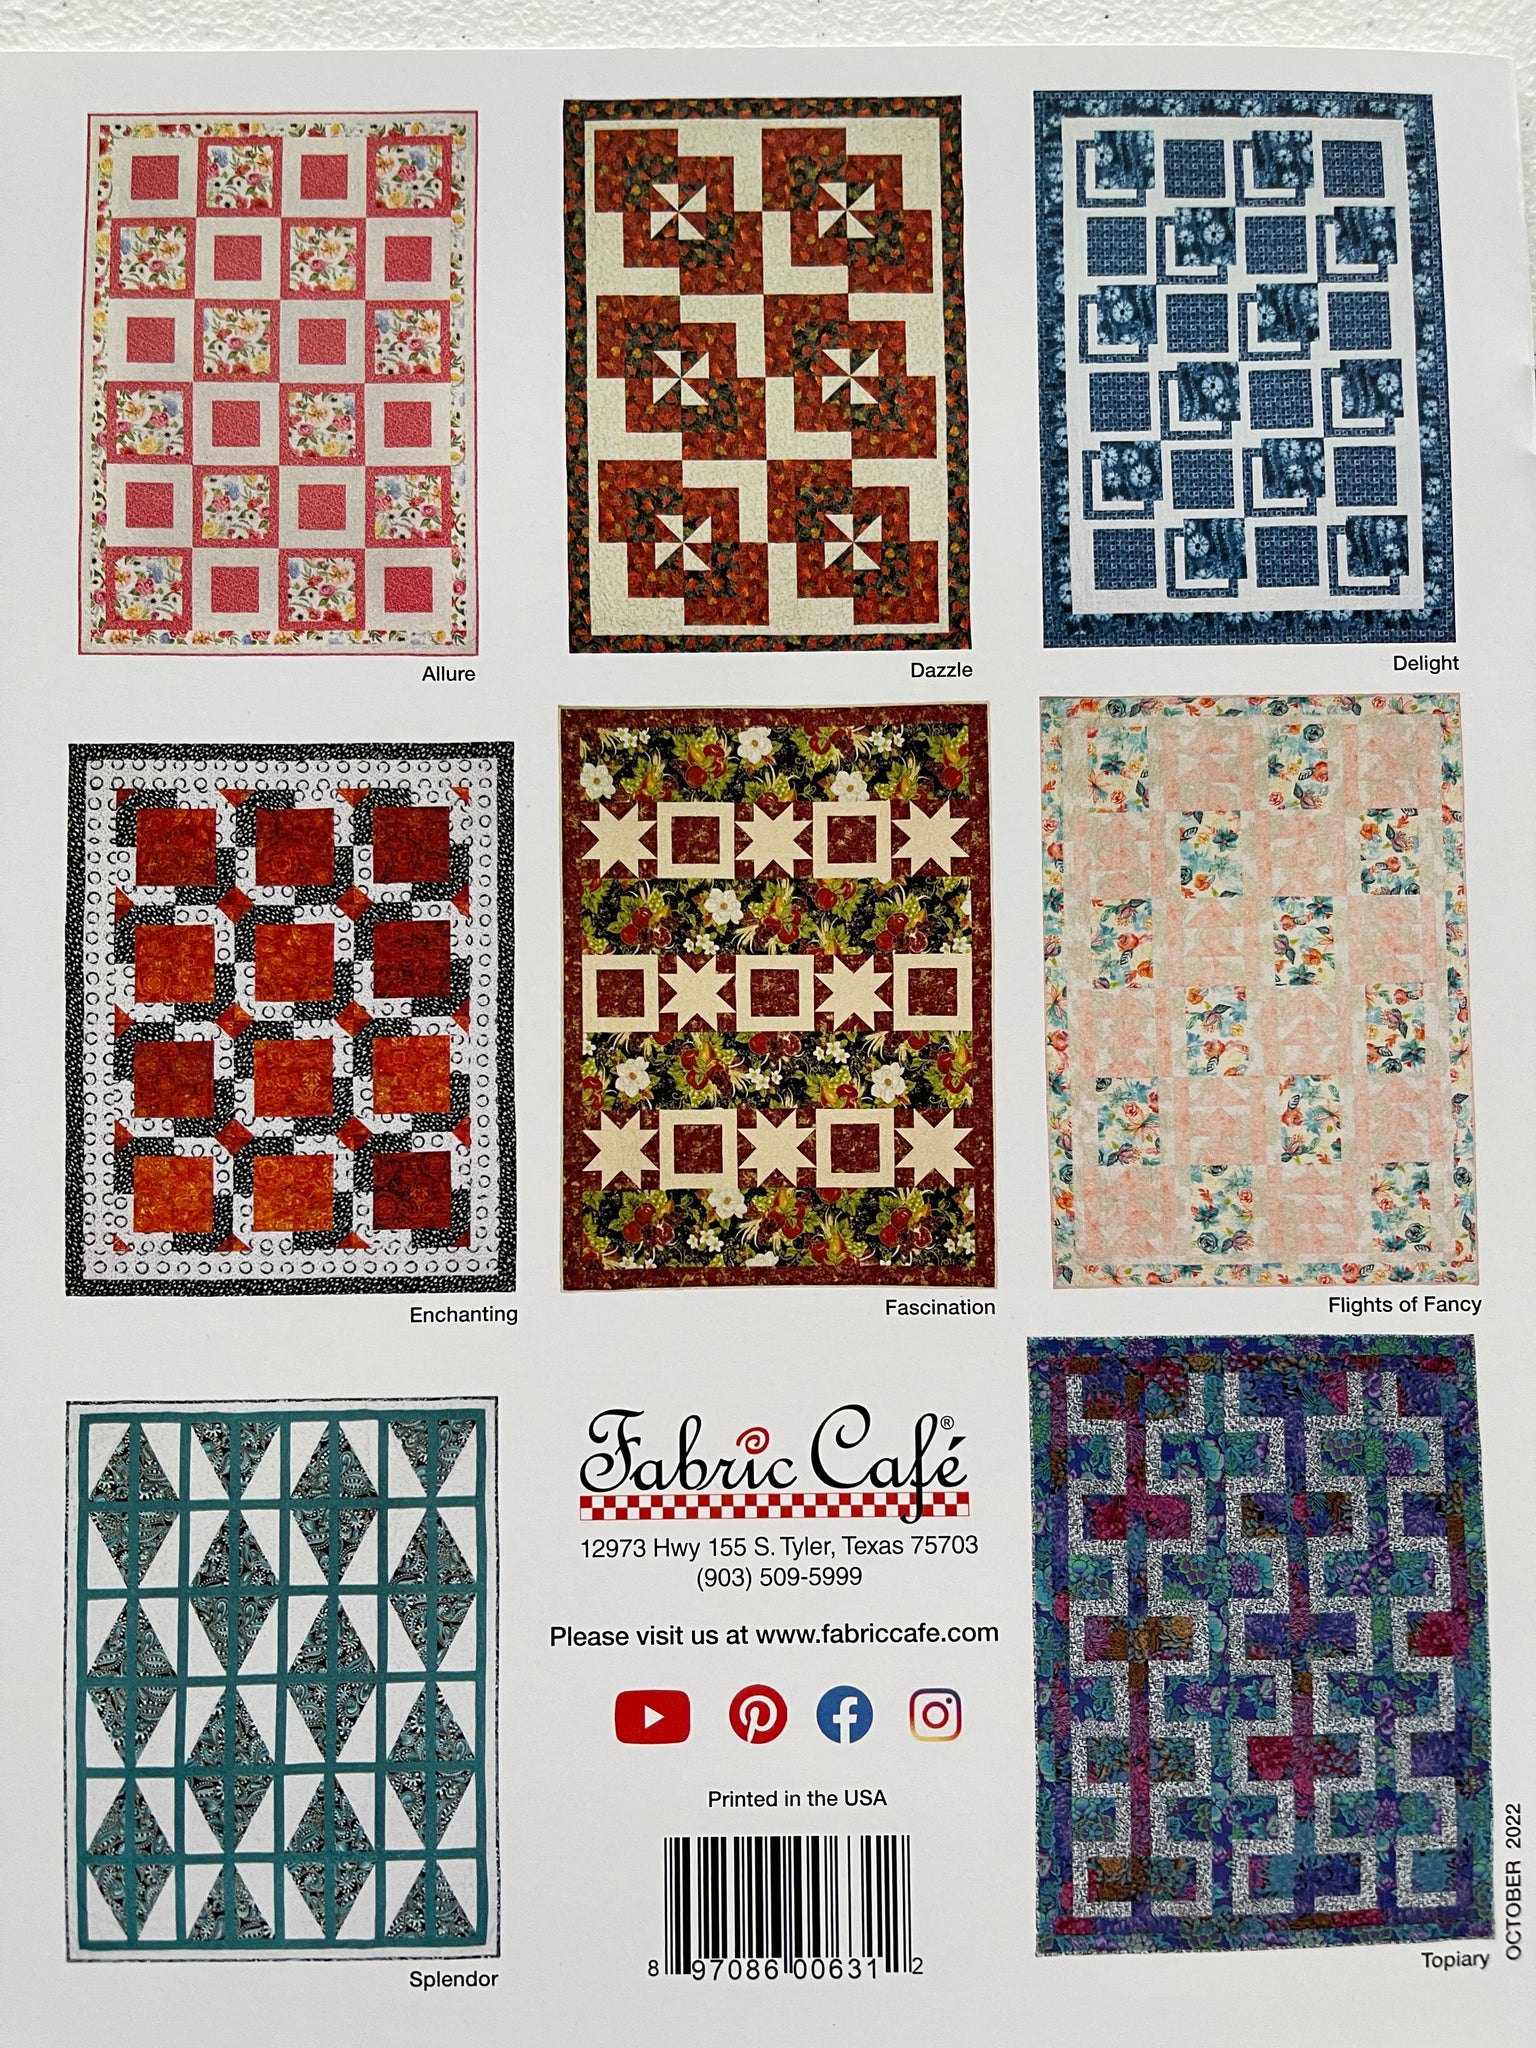 3 Yard Quilt Pattern Books – Stitches in the Window